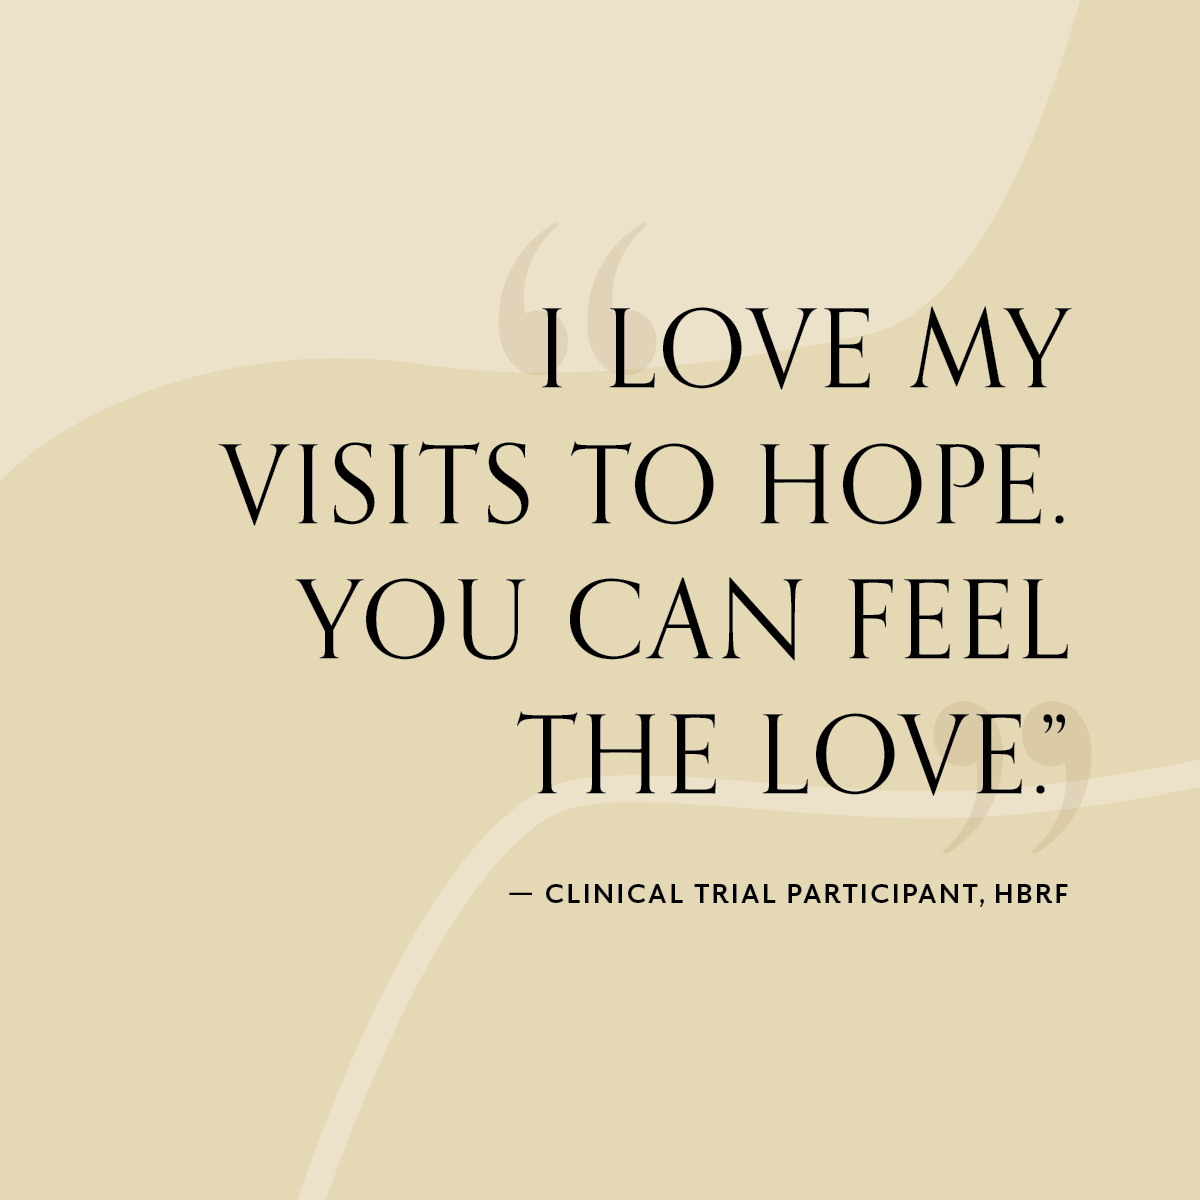 “I love my visits to Hope. You can feel the love.” – Clinical Trial Participant, HBRF #scienceinservice #patientsfirst #research #community #love